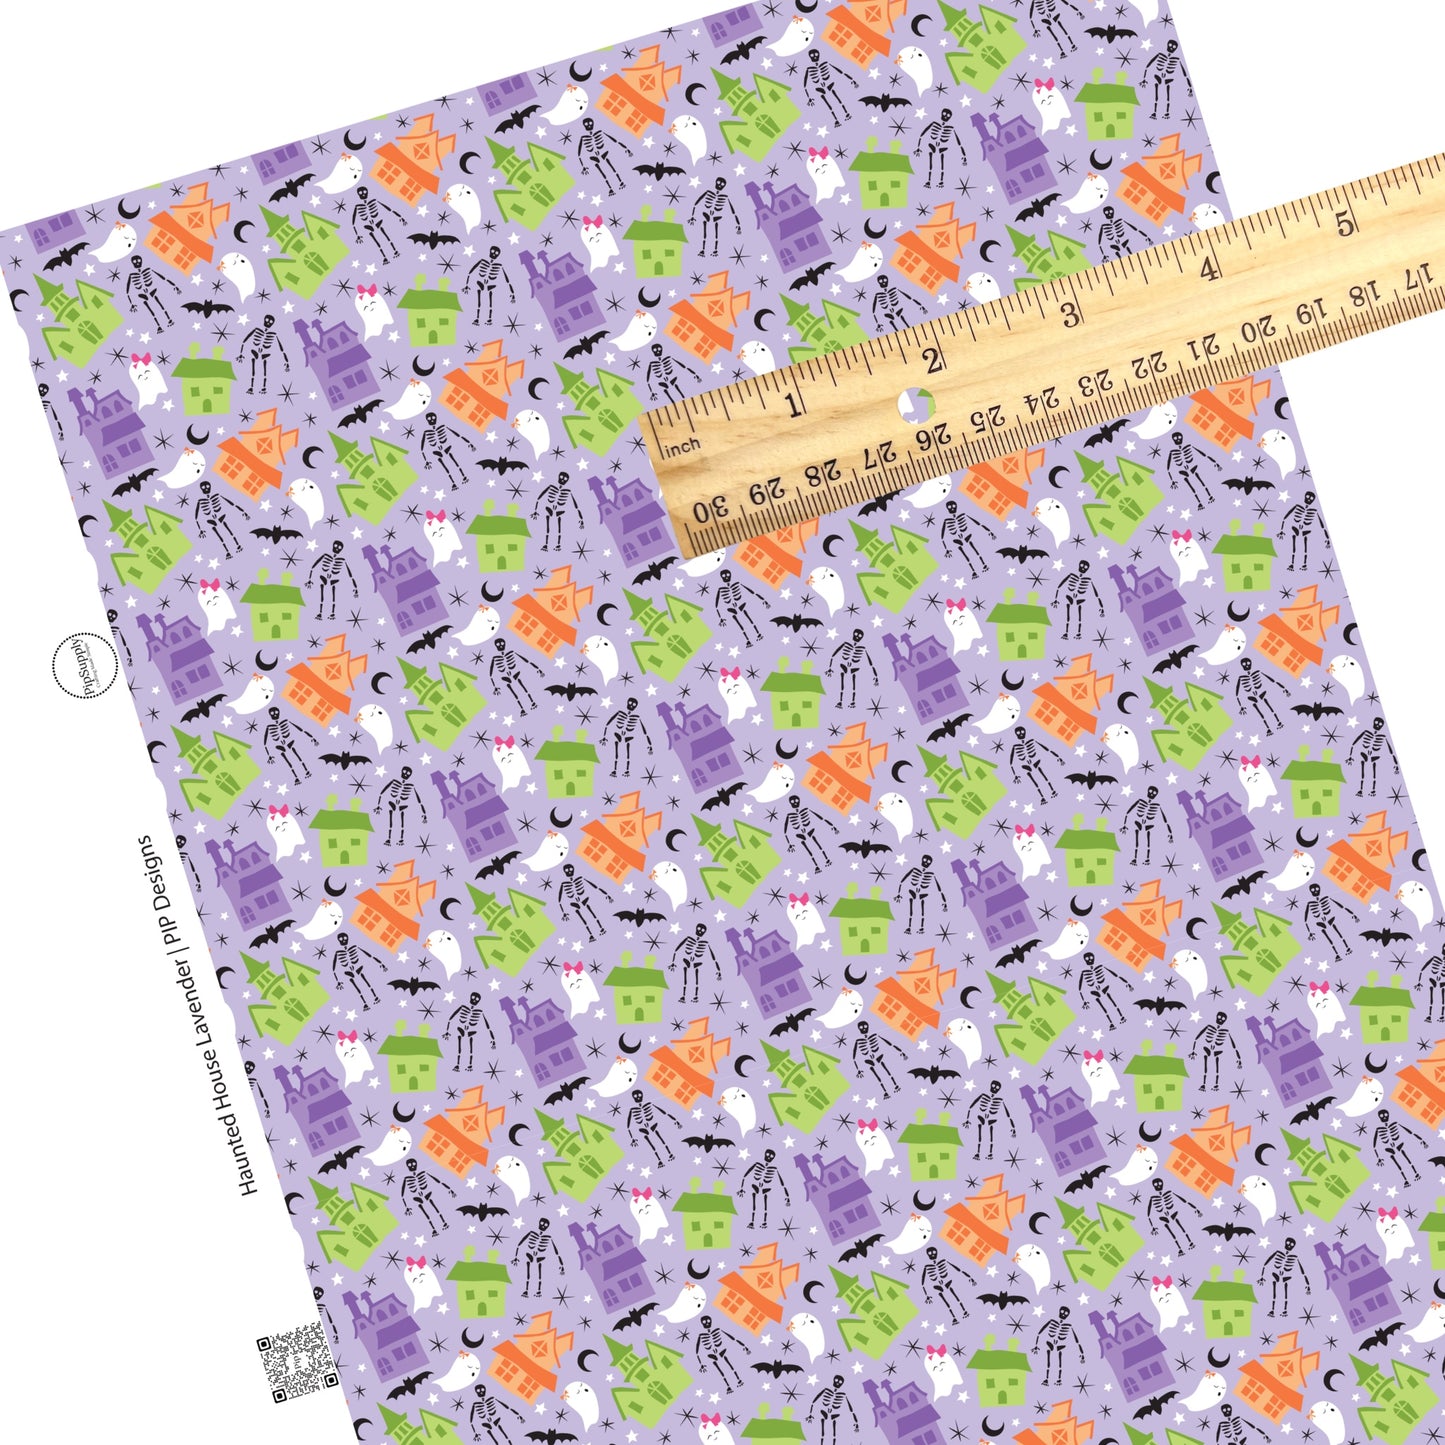 These Halloween themed light purple faux leather sheets contain the following design elements: haunted houses, moons, tiny stars, ghost, and skeletons on pastel purple. Our CPSIA compliant faux leather sheets or rolls can be used for all types of crafting projects.